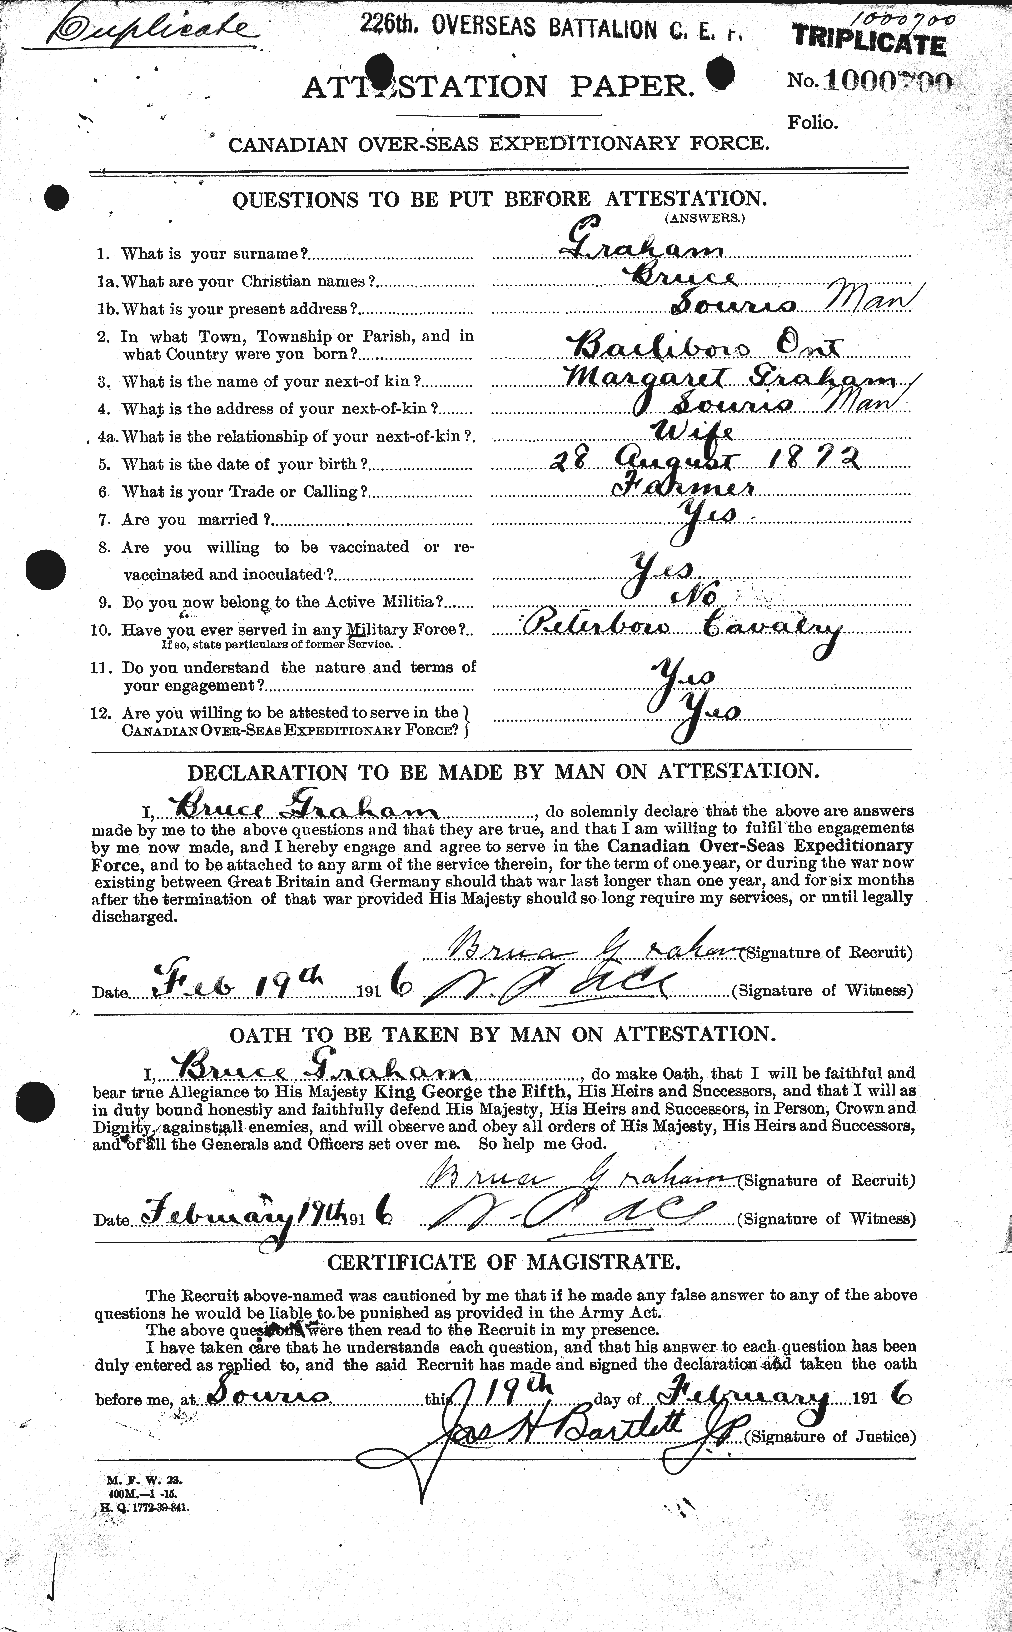 Personnel Records of the First World War - CEF 359674a